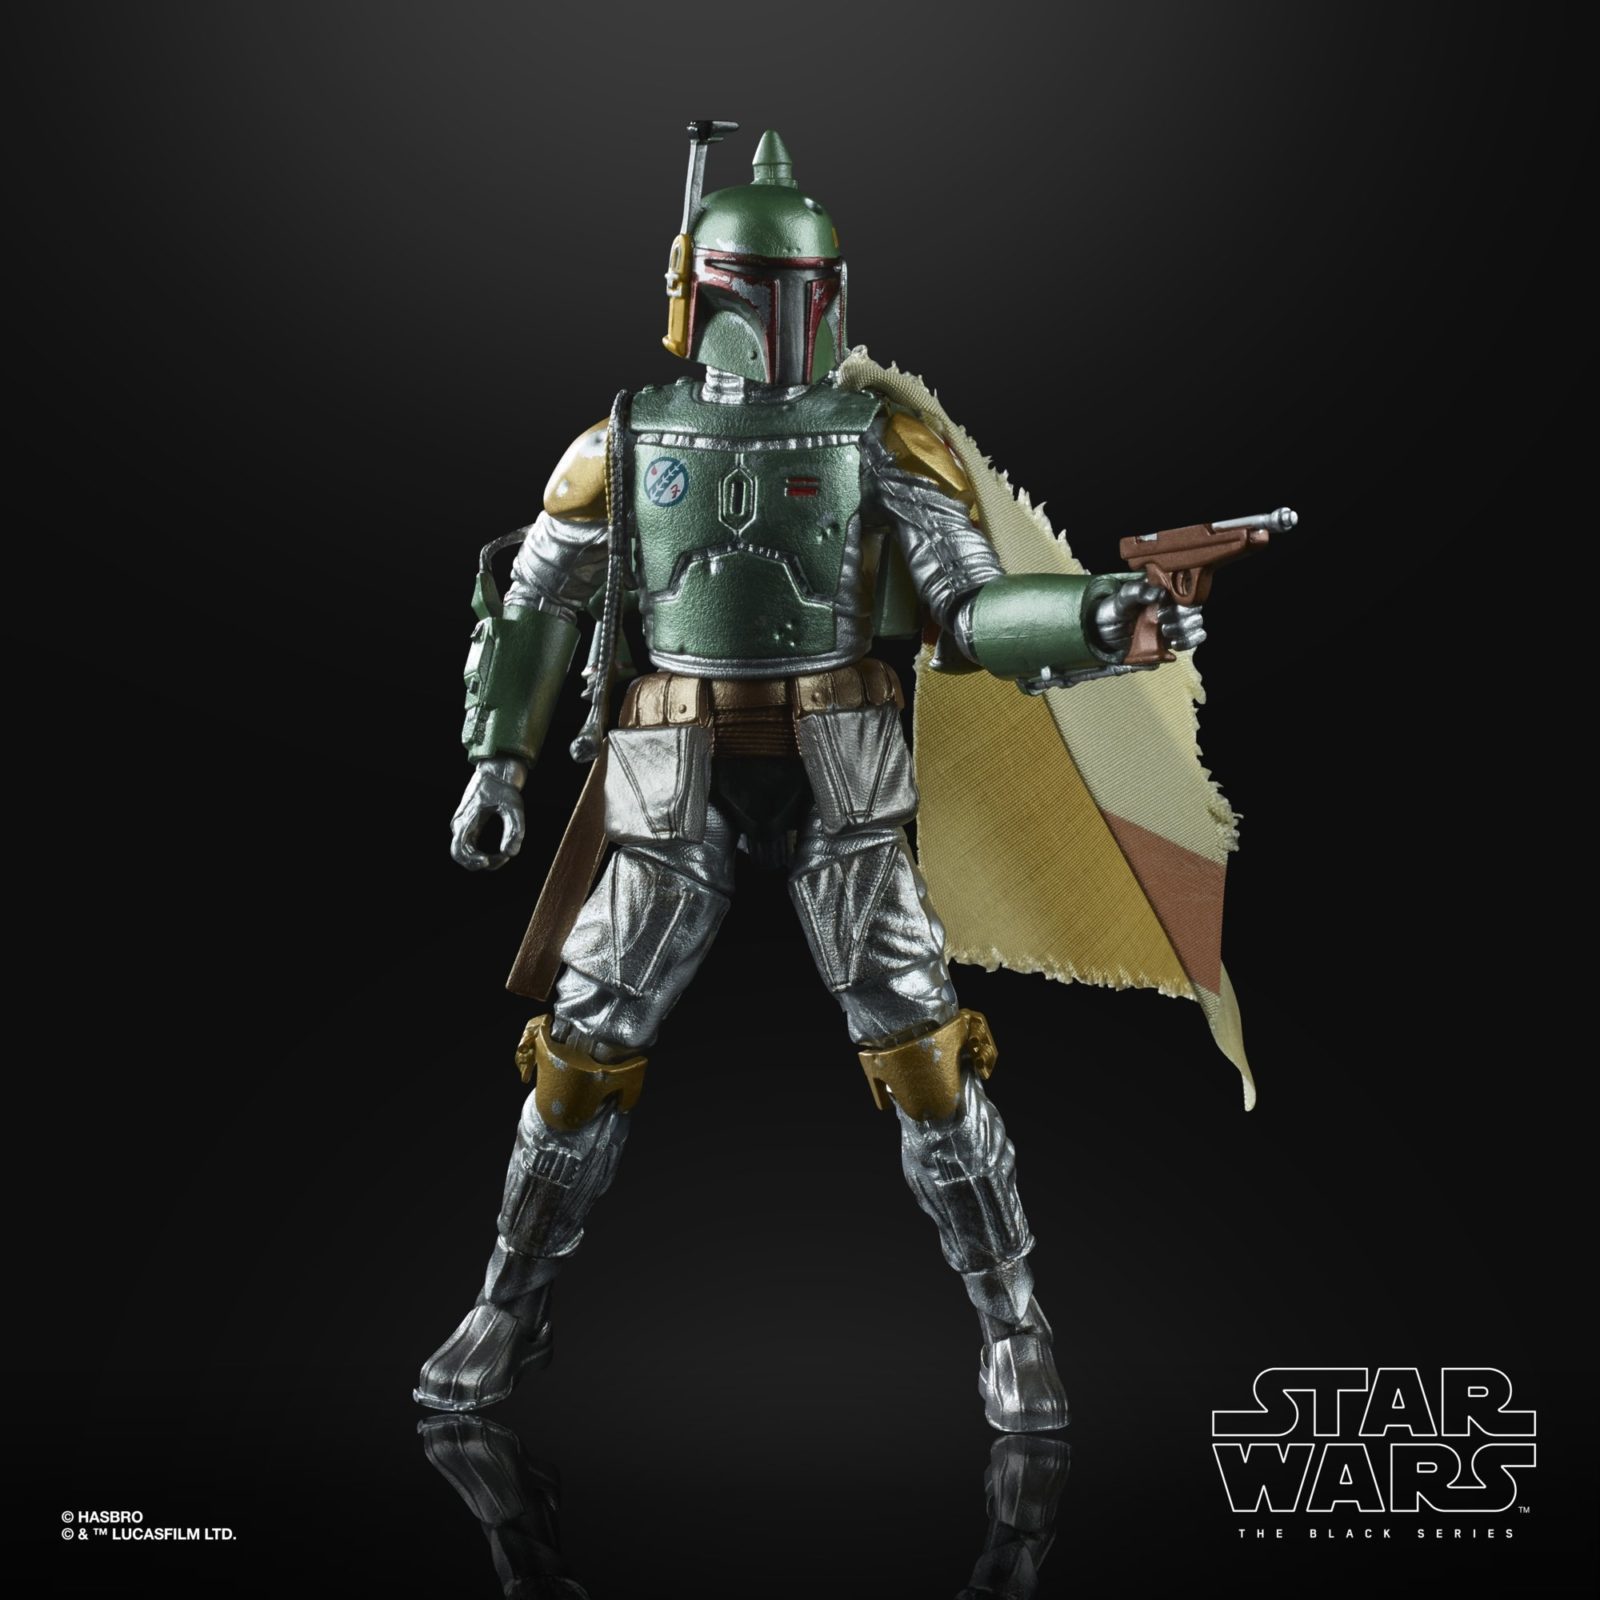 Star Wars The Black Series Carbonized Collection Boba Fett Action Figure